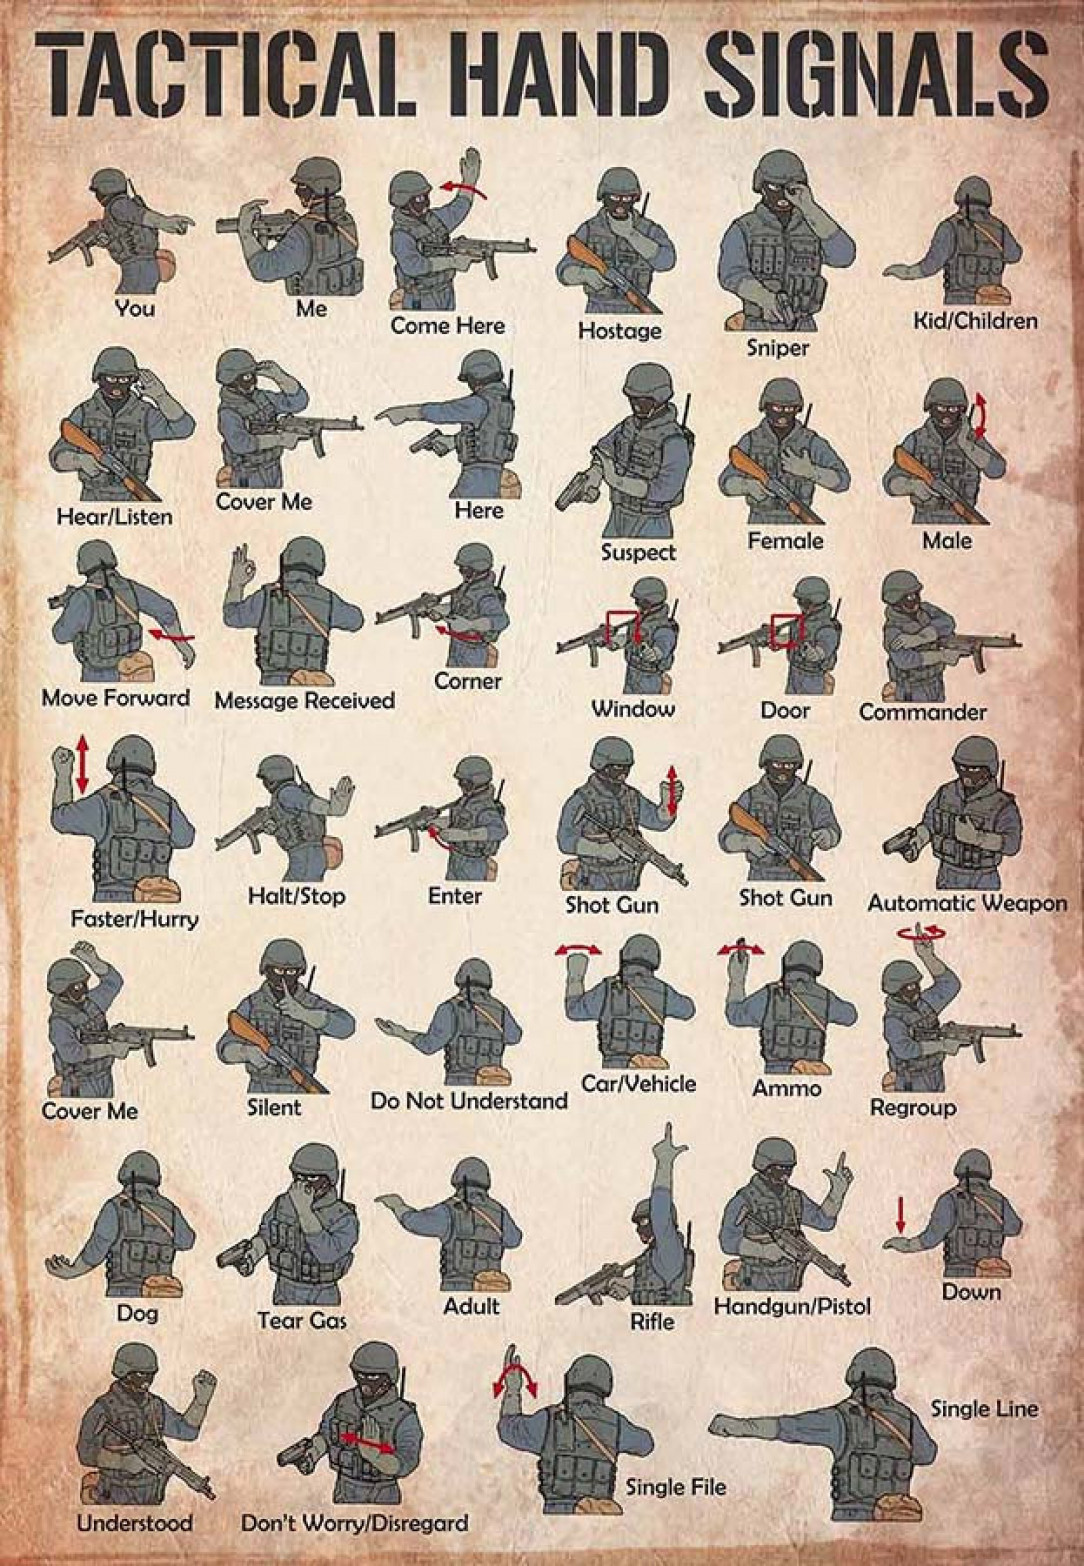 Tactical Hand Signals. Might come in useful one day